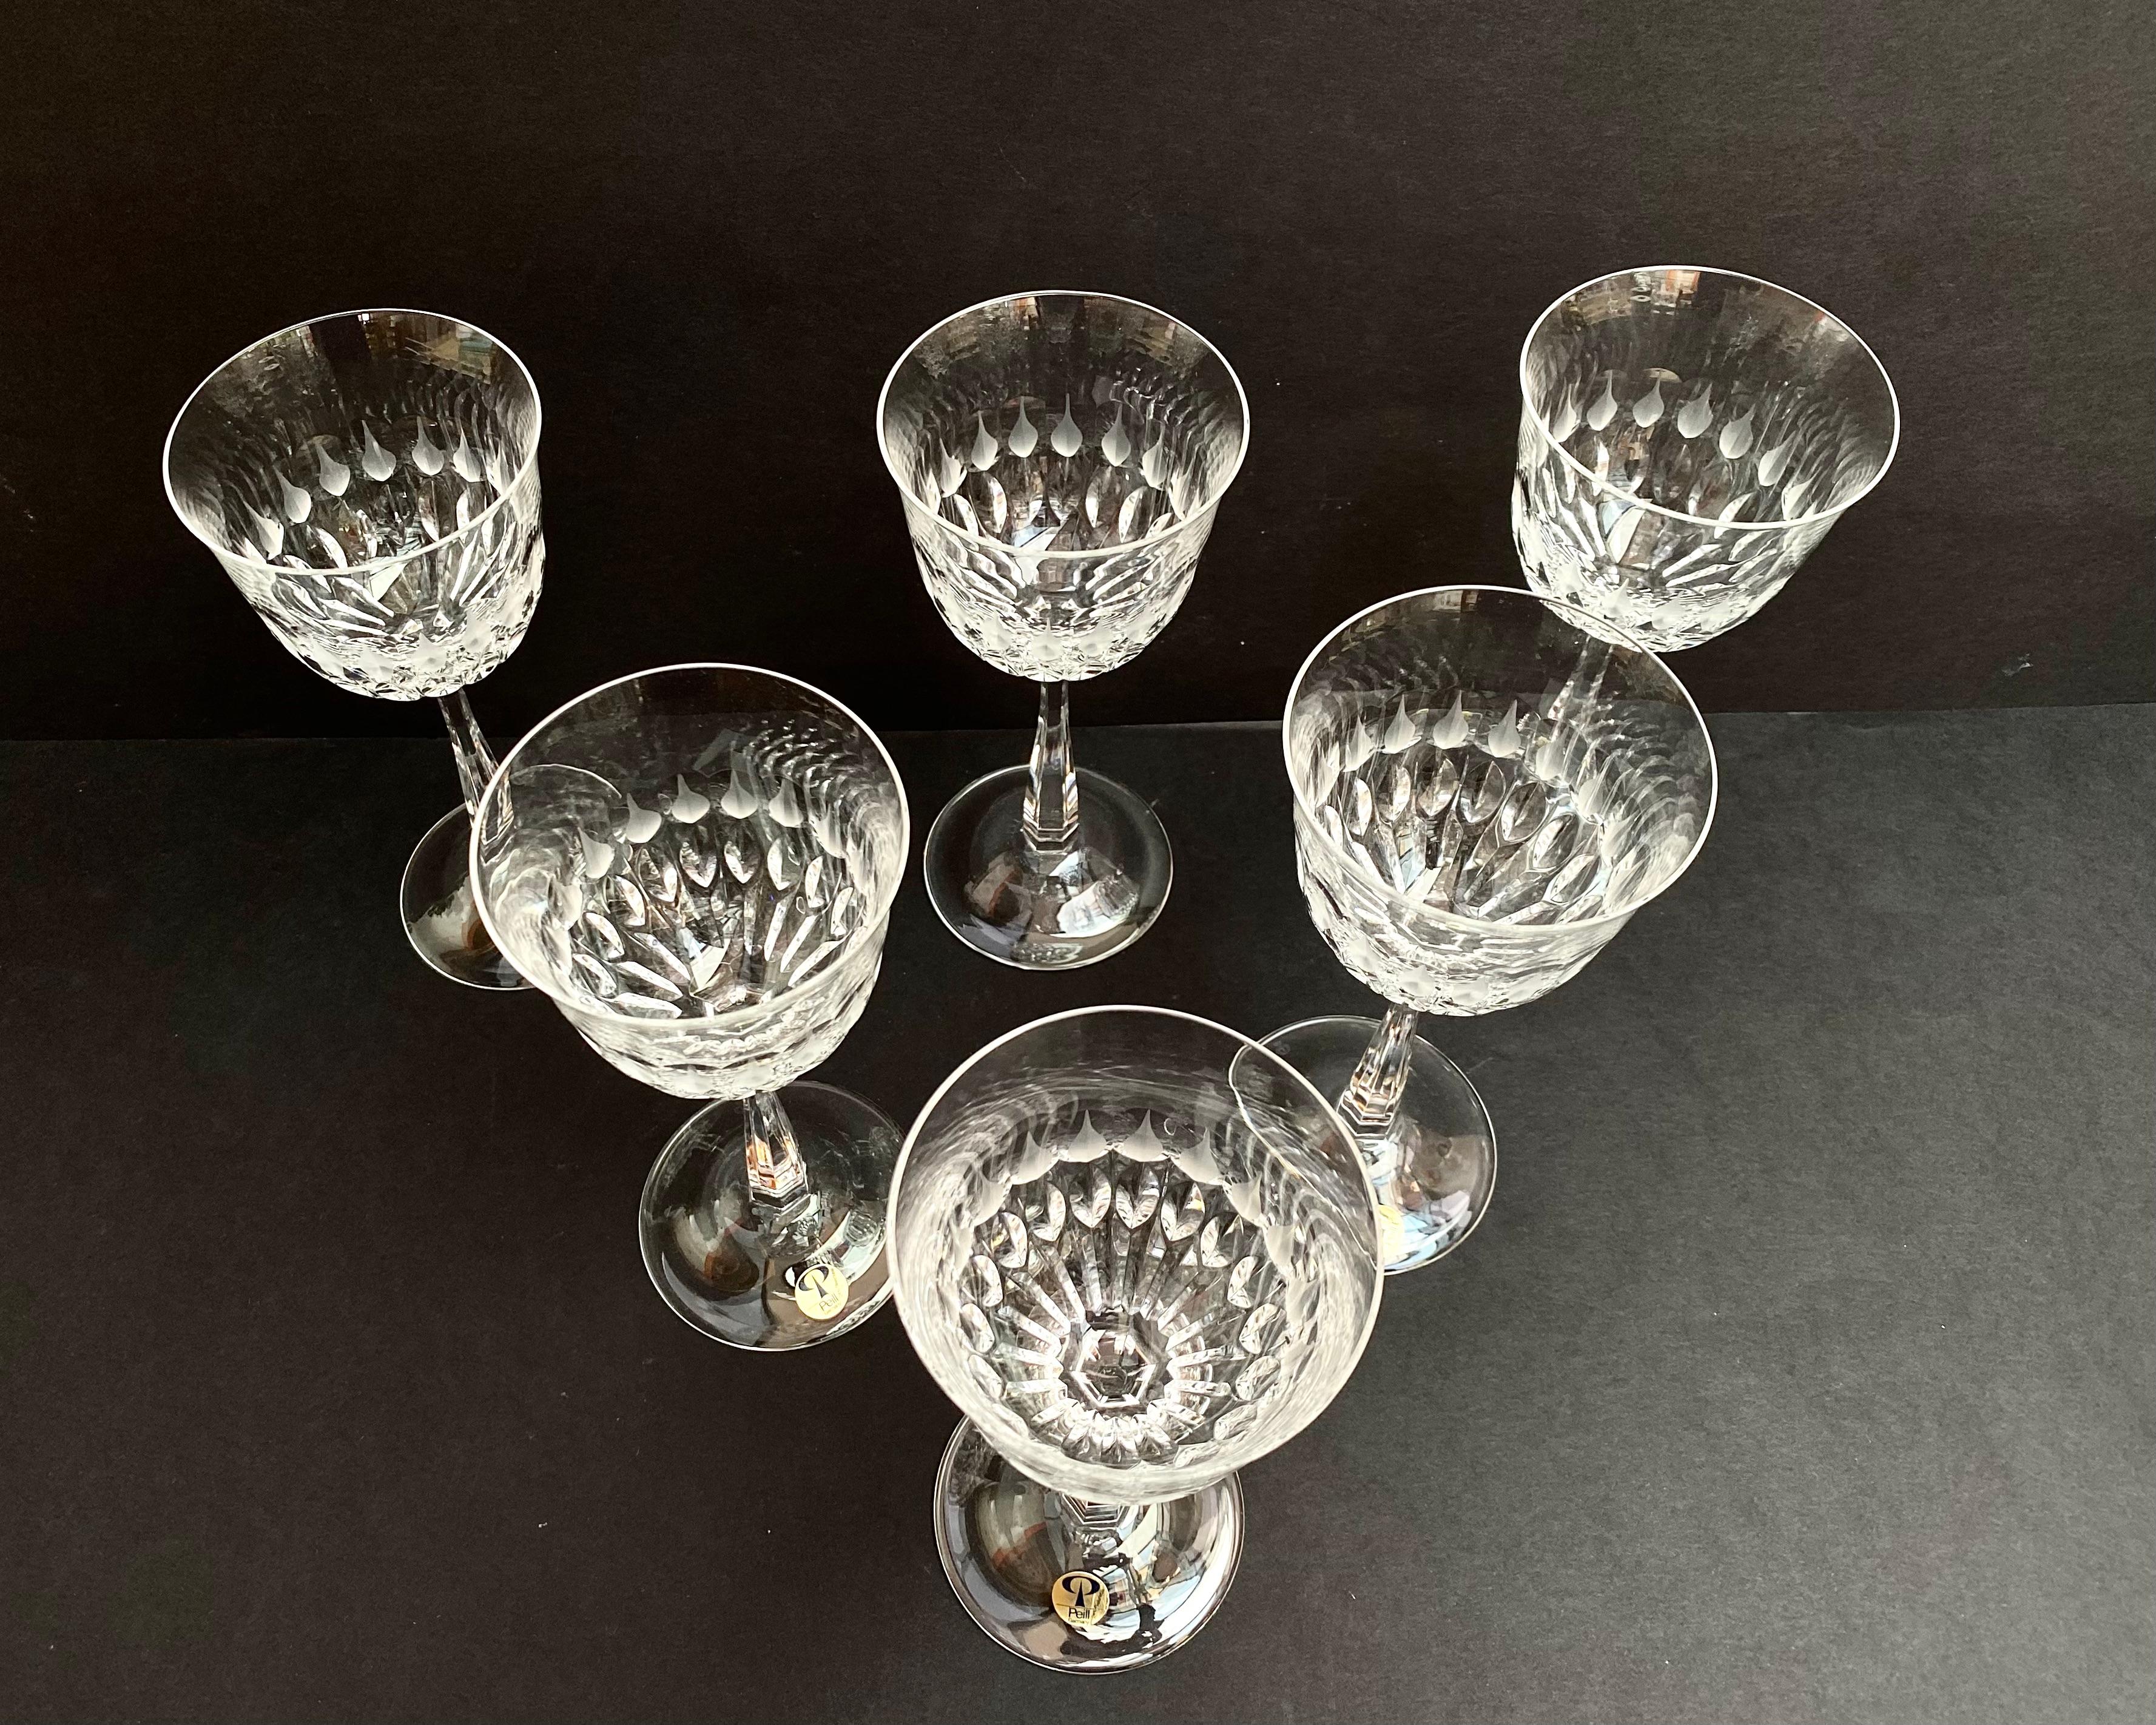 Beautiful Vintage set of 6 crystal wine/champagne glasses.

  Produced in Germany, by the famous manufacturer Peill Glasses, in the 70- 80s. Colorless cut 24% Lead Crystal Wine Glasses. Due to it, the glasses acquire a unique melodic silver